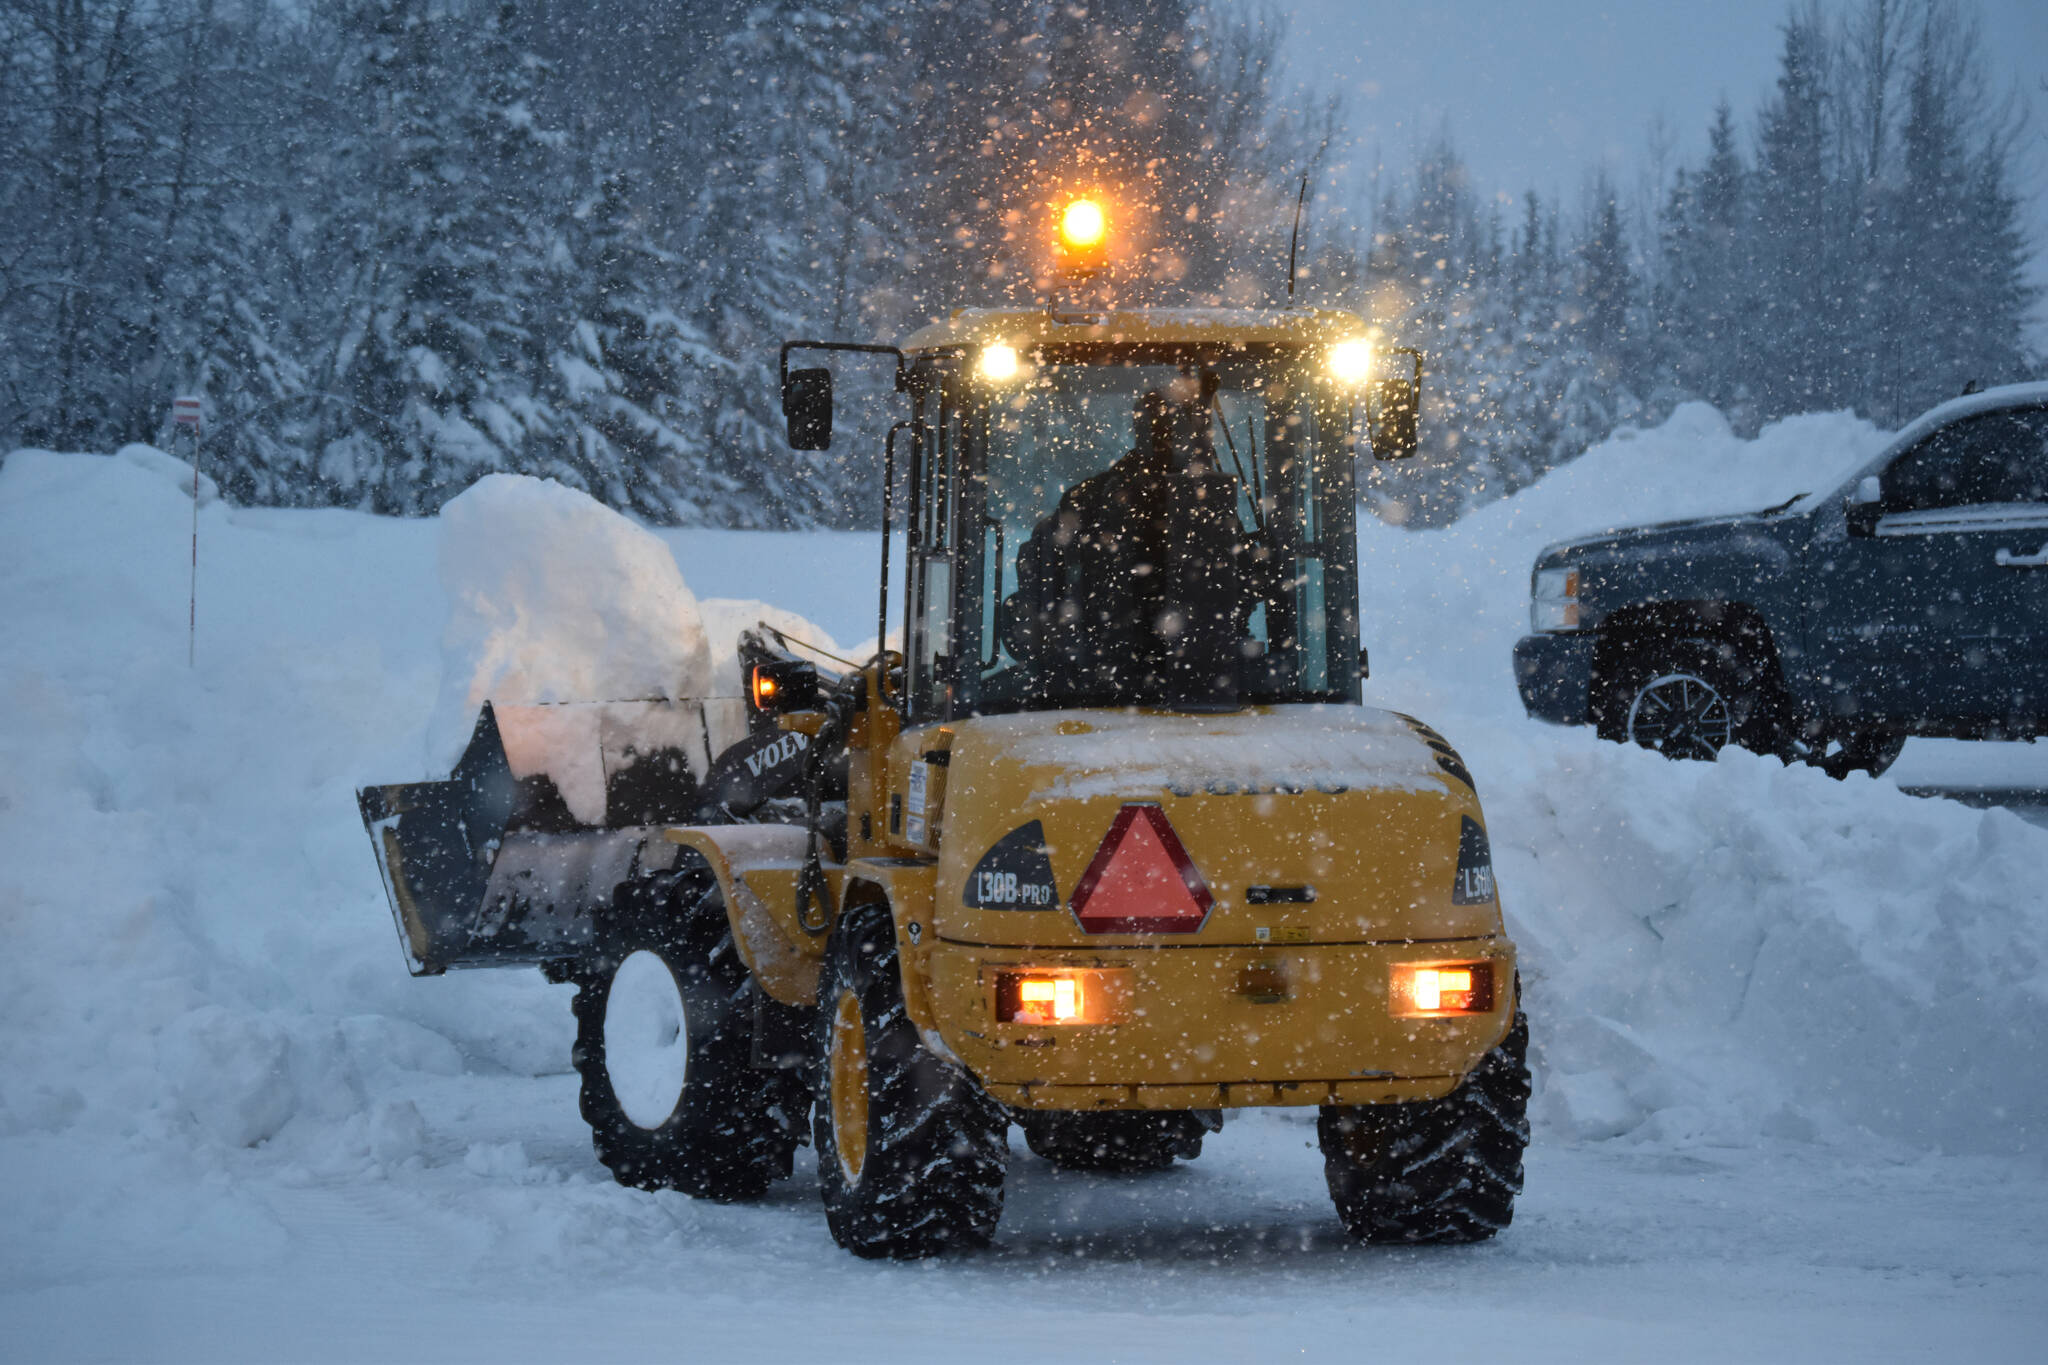 Snow is cleared from the road during the start of another major snowfall on Wednesday, Dec. 14, 2022 outside of The Peninsula Clarion offices in Kenai, Alaska. (Jake Dye/Peninsula Clarion)